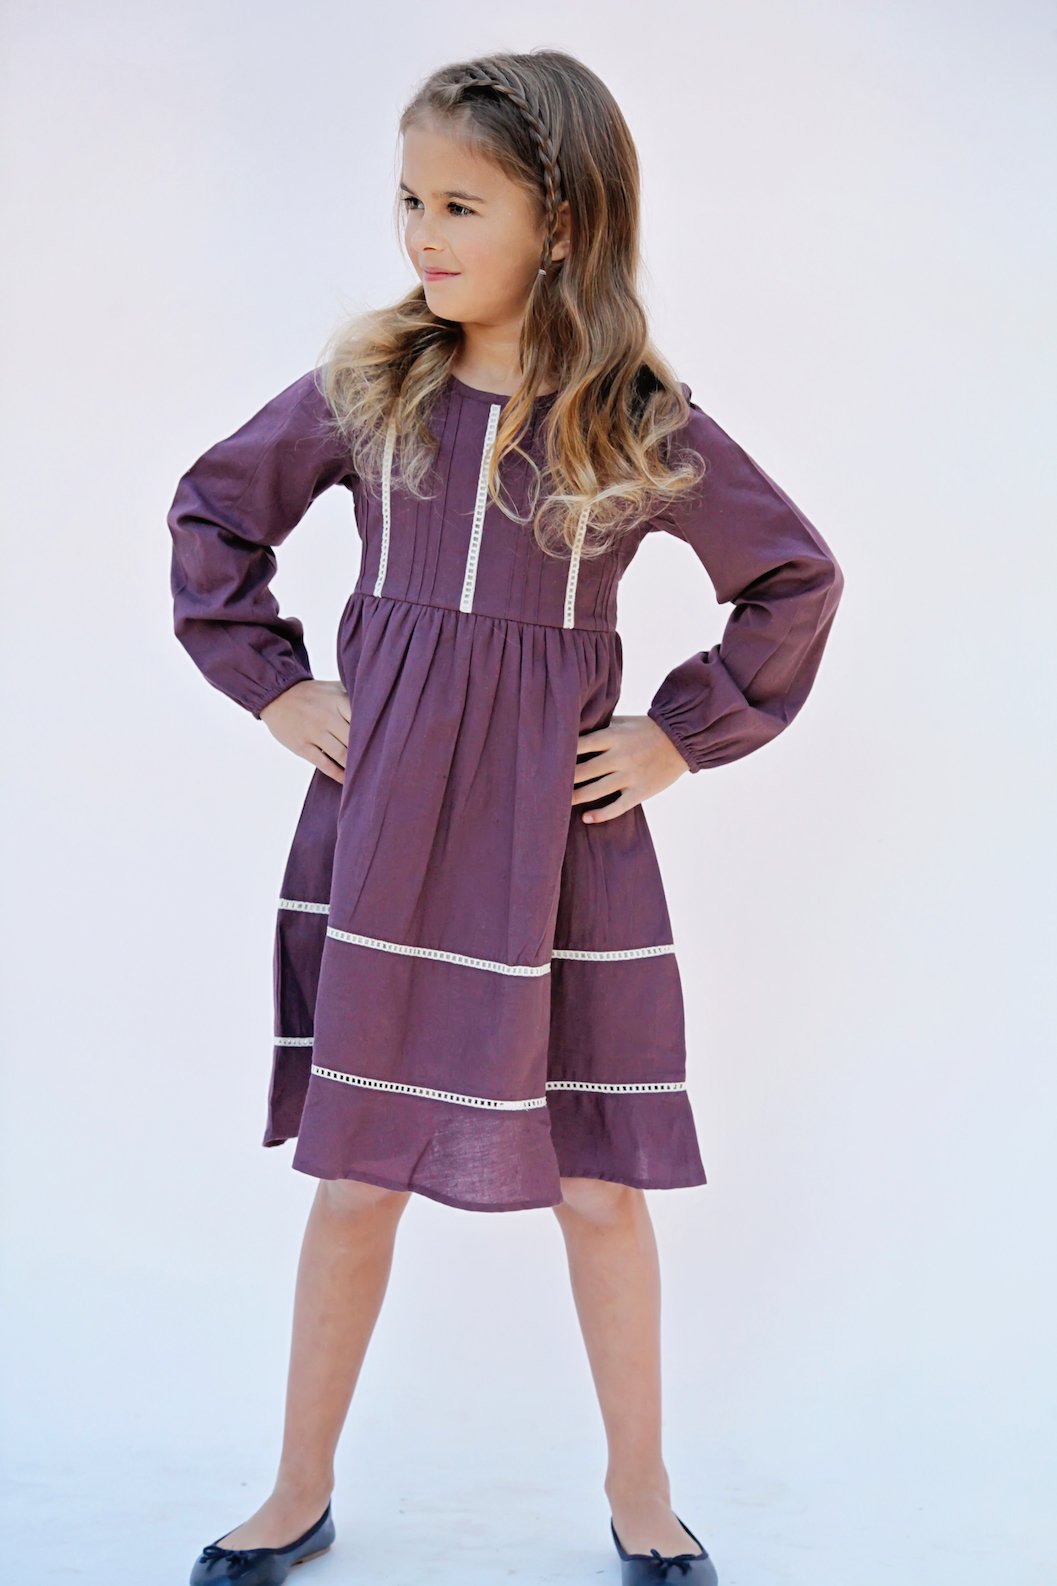 Aubergine Pin-Tuck and Lace Detail Dress